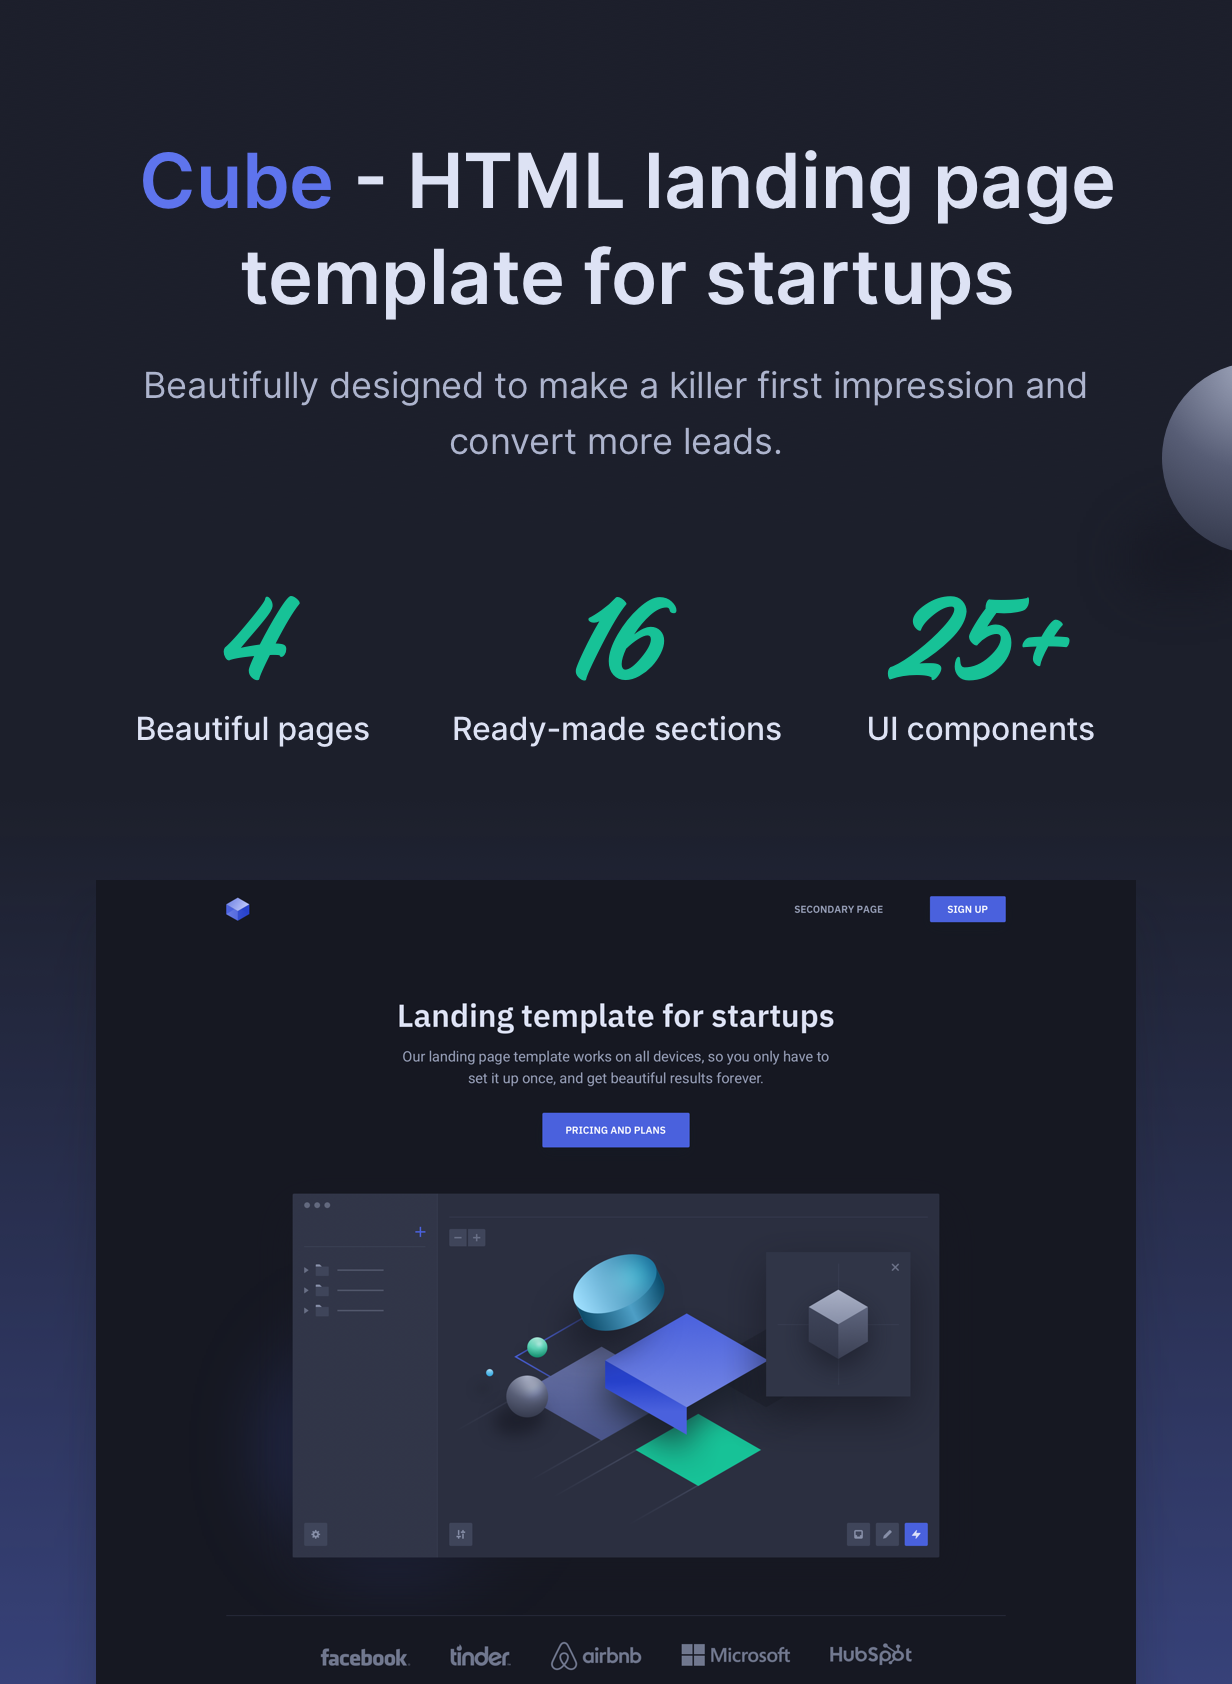 Cube - React Landing Page Template for Startups - 2